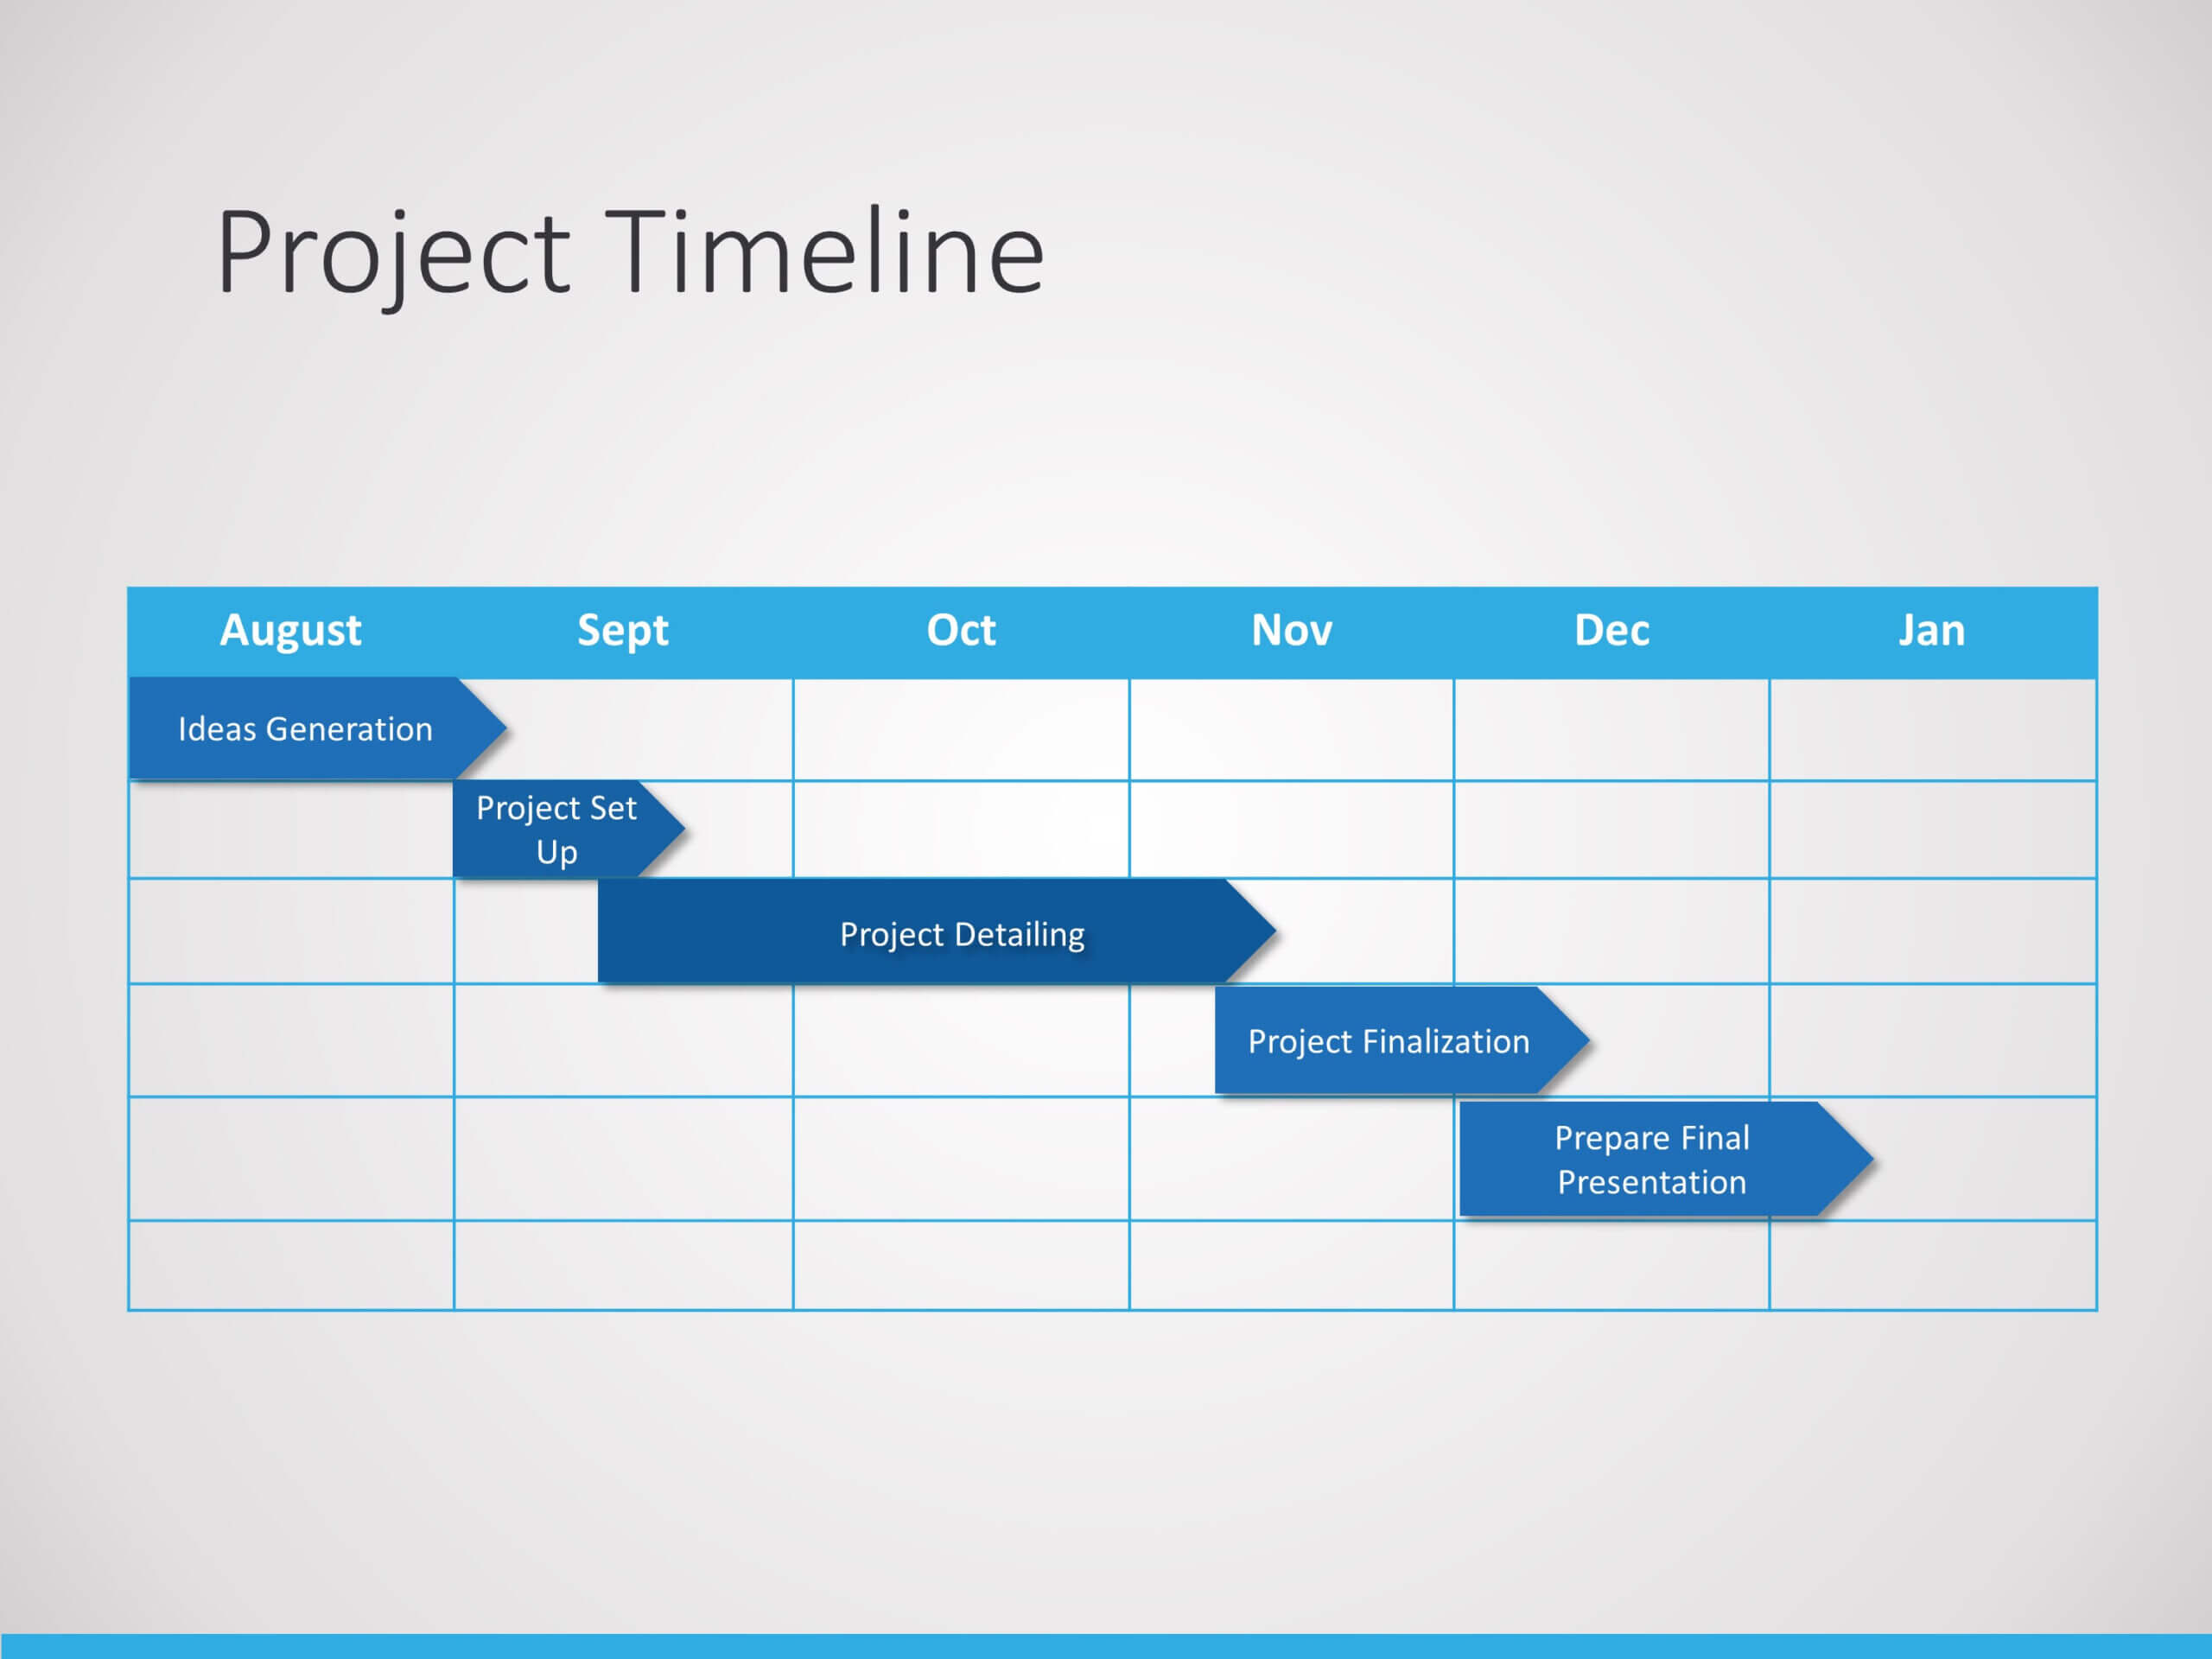 Project Timeline Powerpoint Template 2 | Project Planning Pertaining To Project Schedule Template Powerpoint